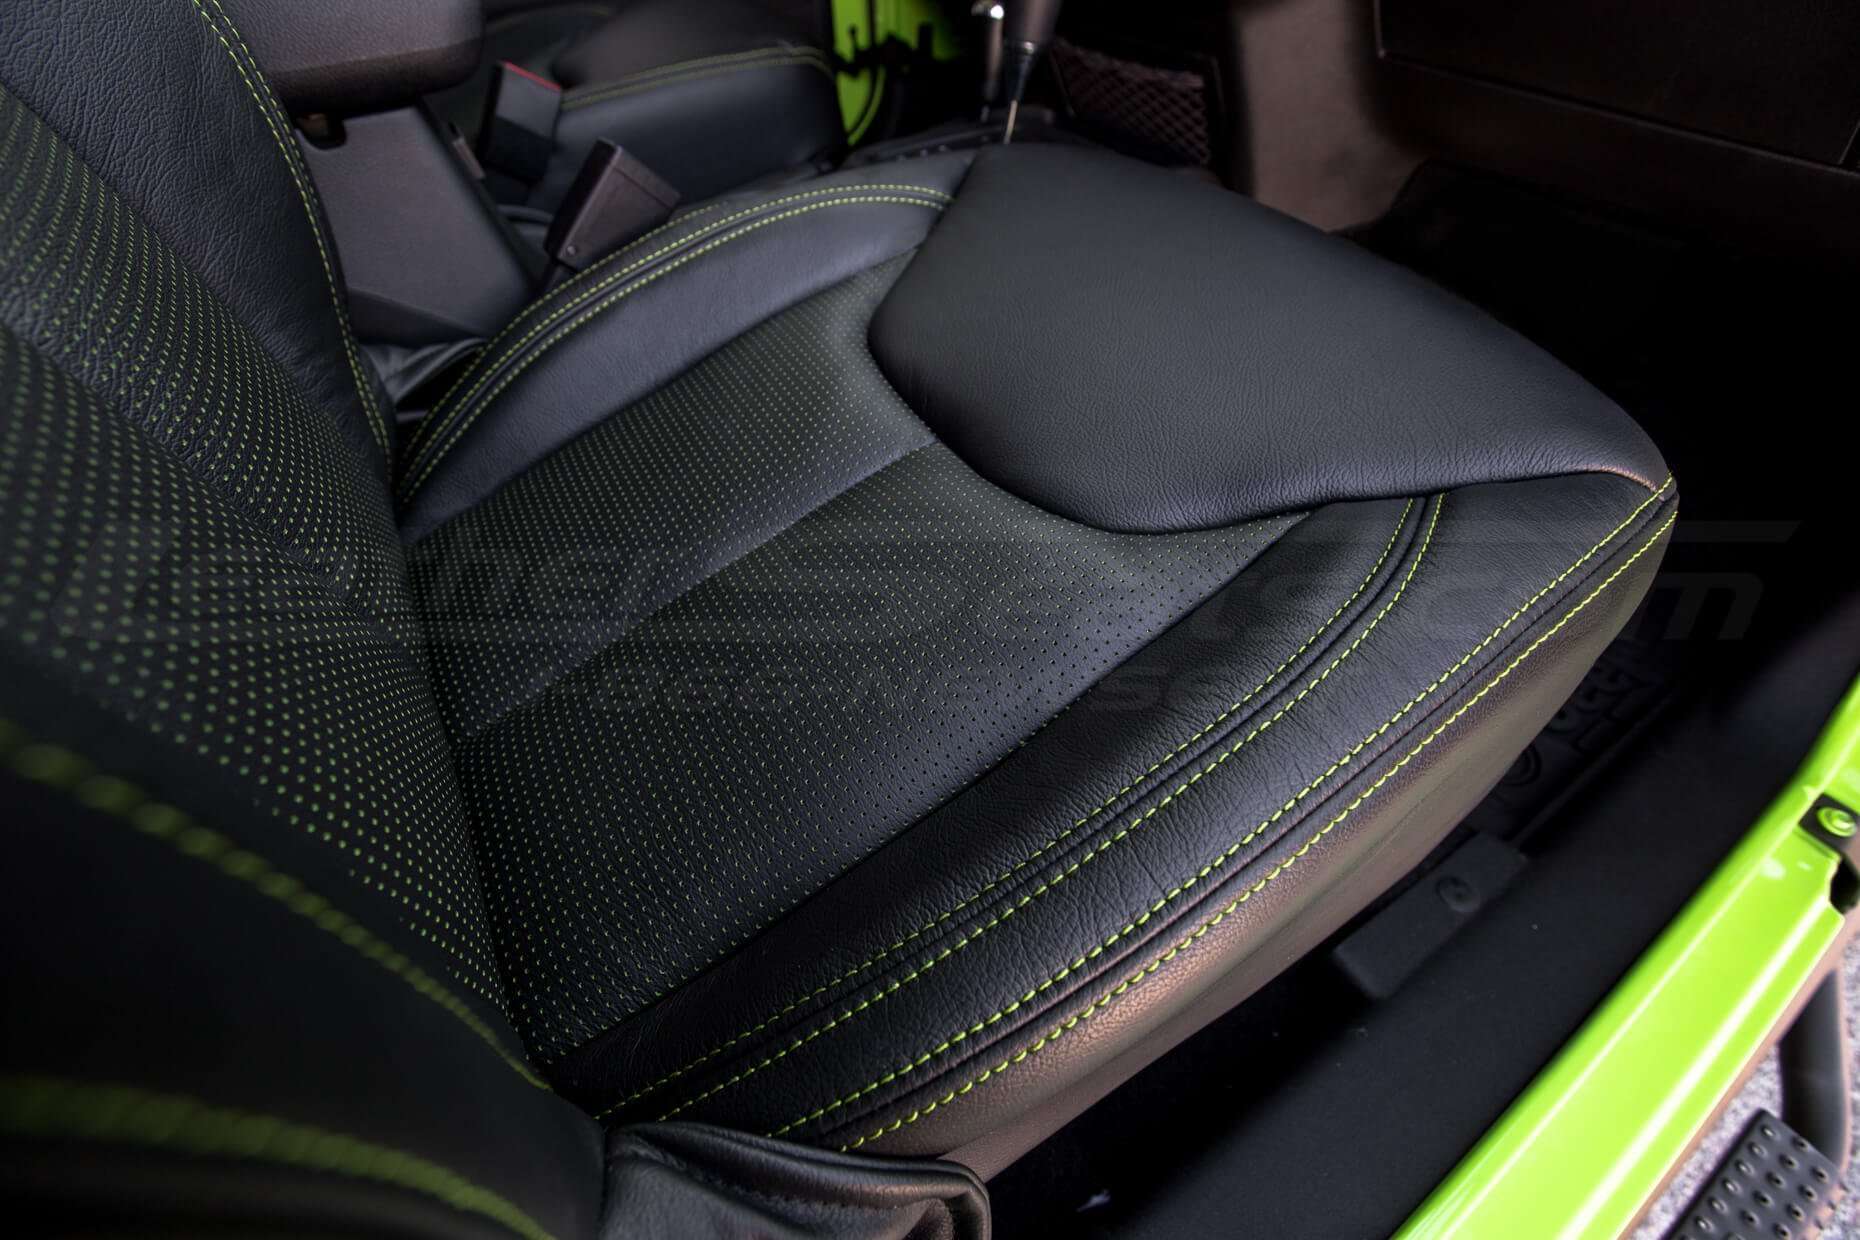 Jeep Wrangler Installed Leather Seats - Black & Piazza Green - Piazza Perforation & double-stitching